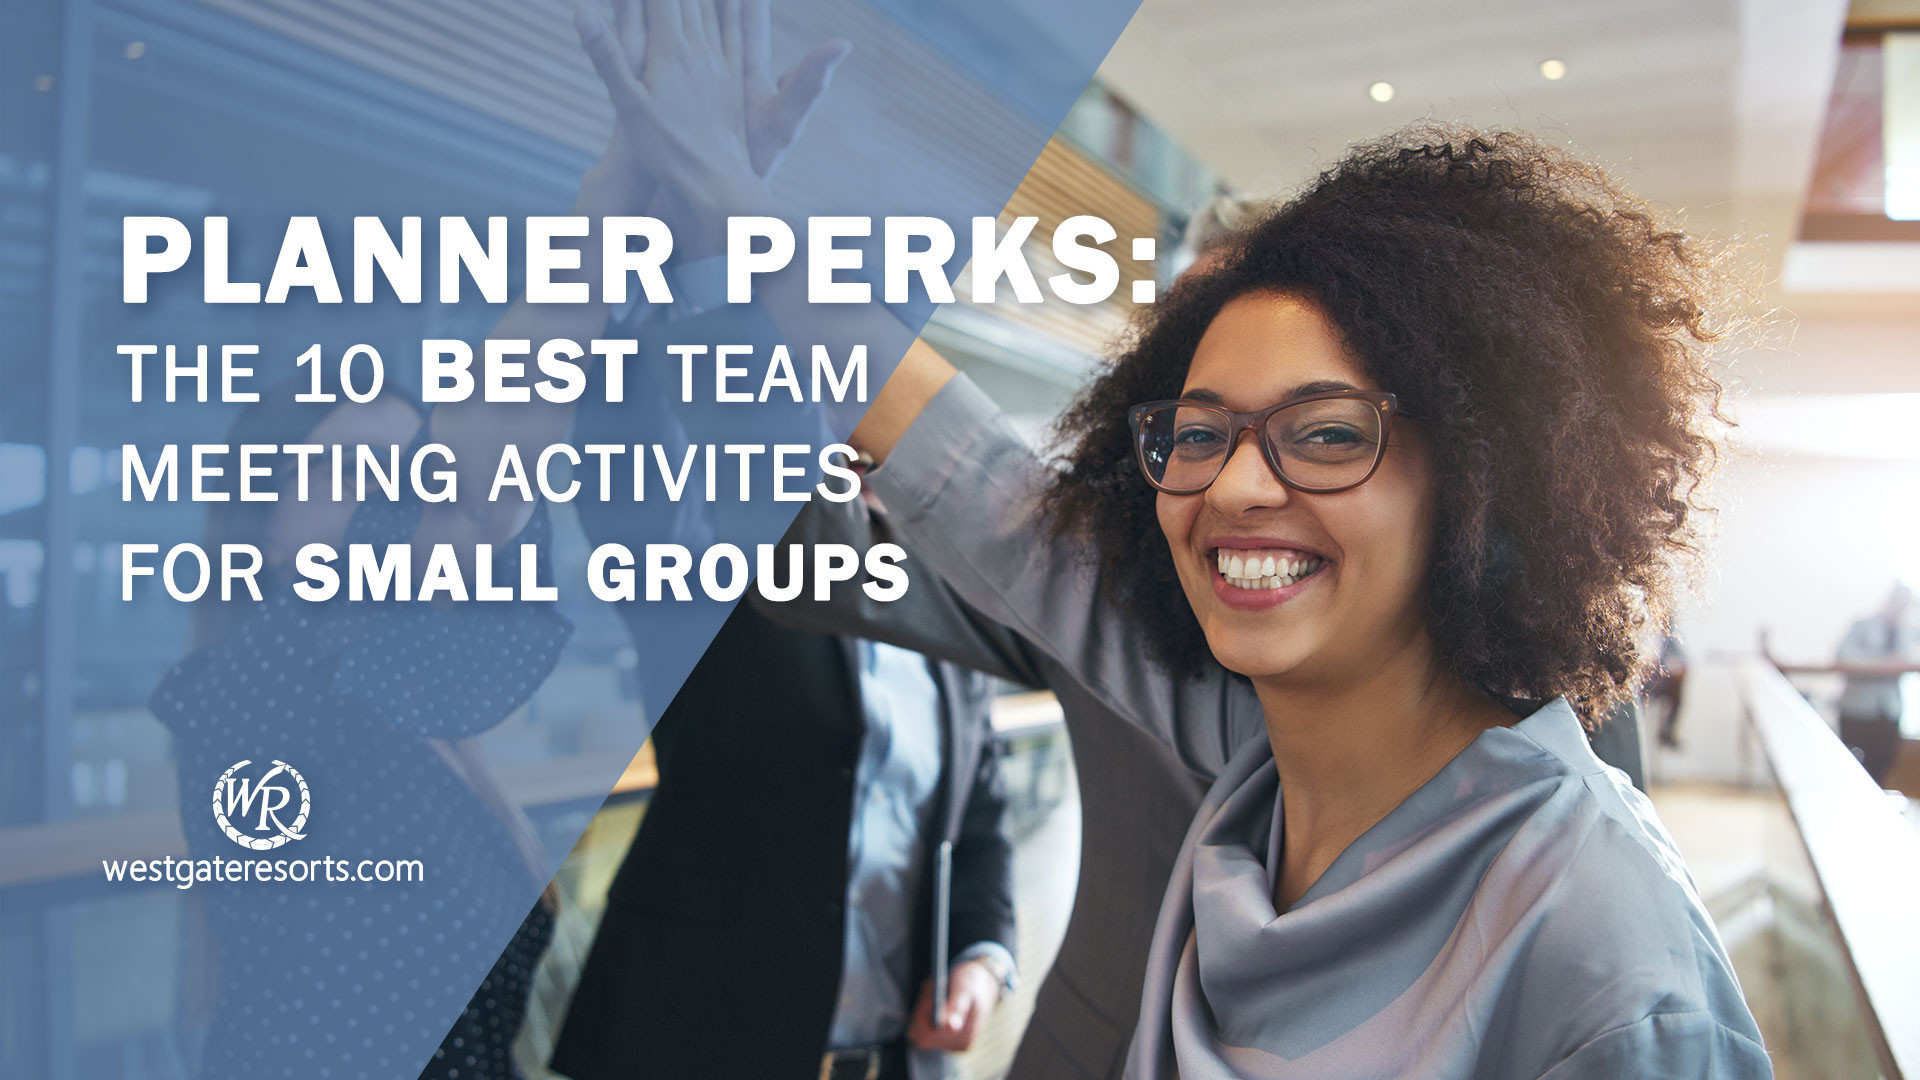 Planner Perks: The 10 Best Team Meeting Activities for Small Groups | Meeting Planner Tips | Westgate Groups & Meetings